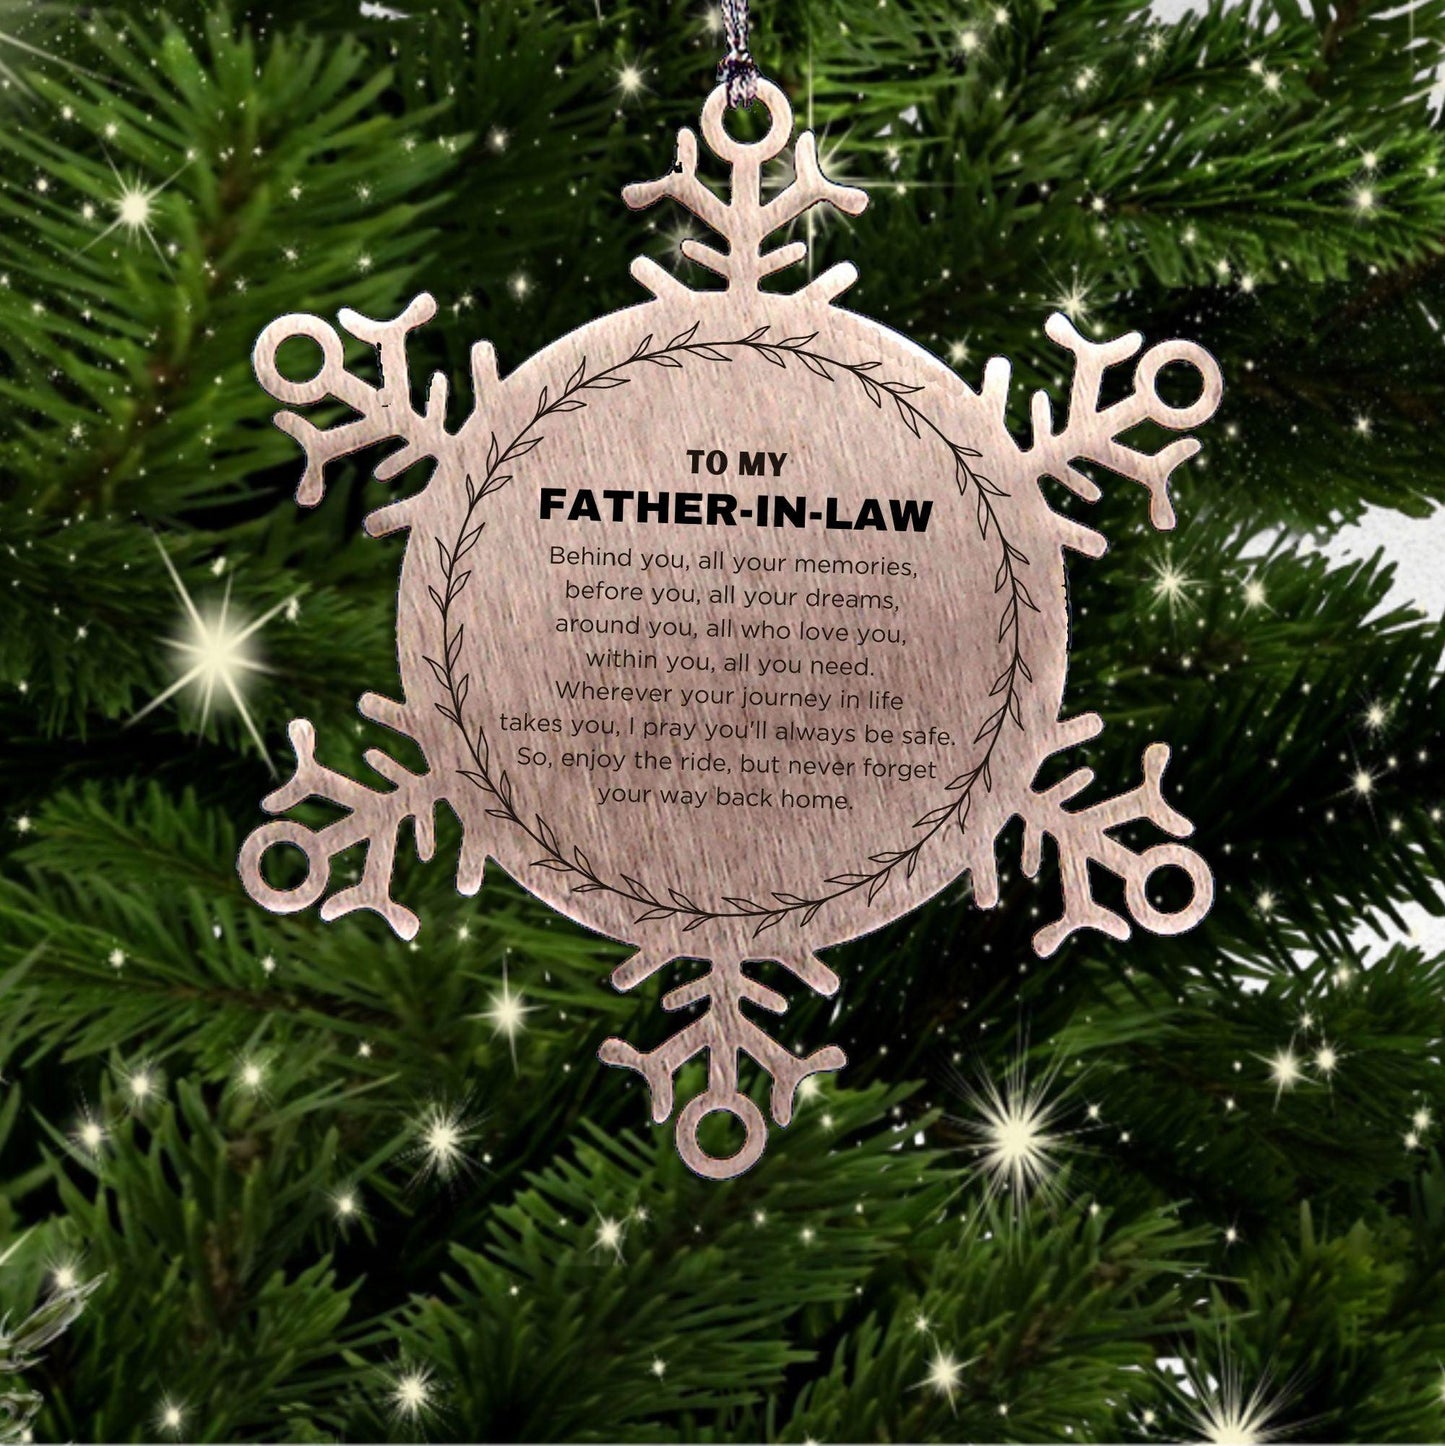 Inspirational Father-In-Law Snowflake Ornament, Behind you, all your Memories, Before you, all your Dreams - Birthday, Christmas Holiday Gifts - Mallard Moon Gift Shop